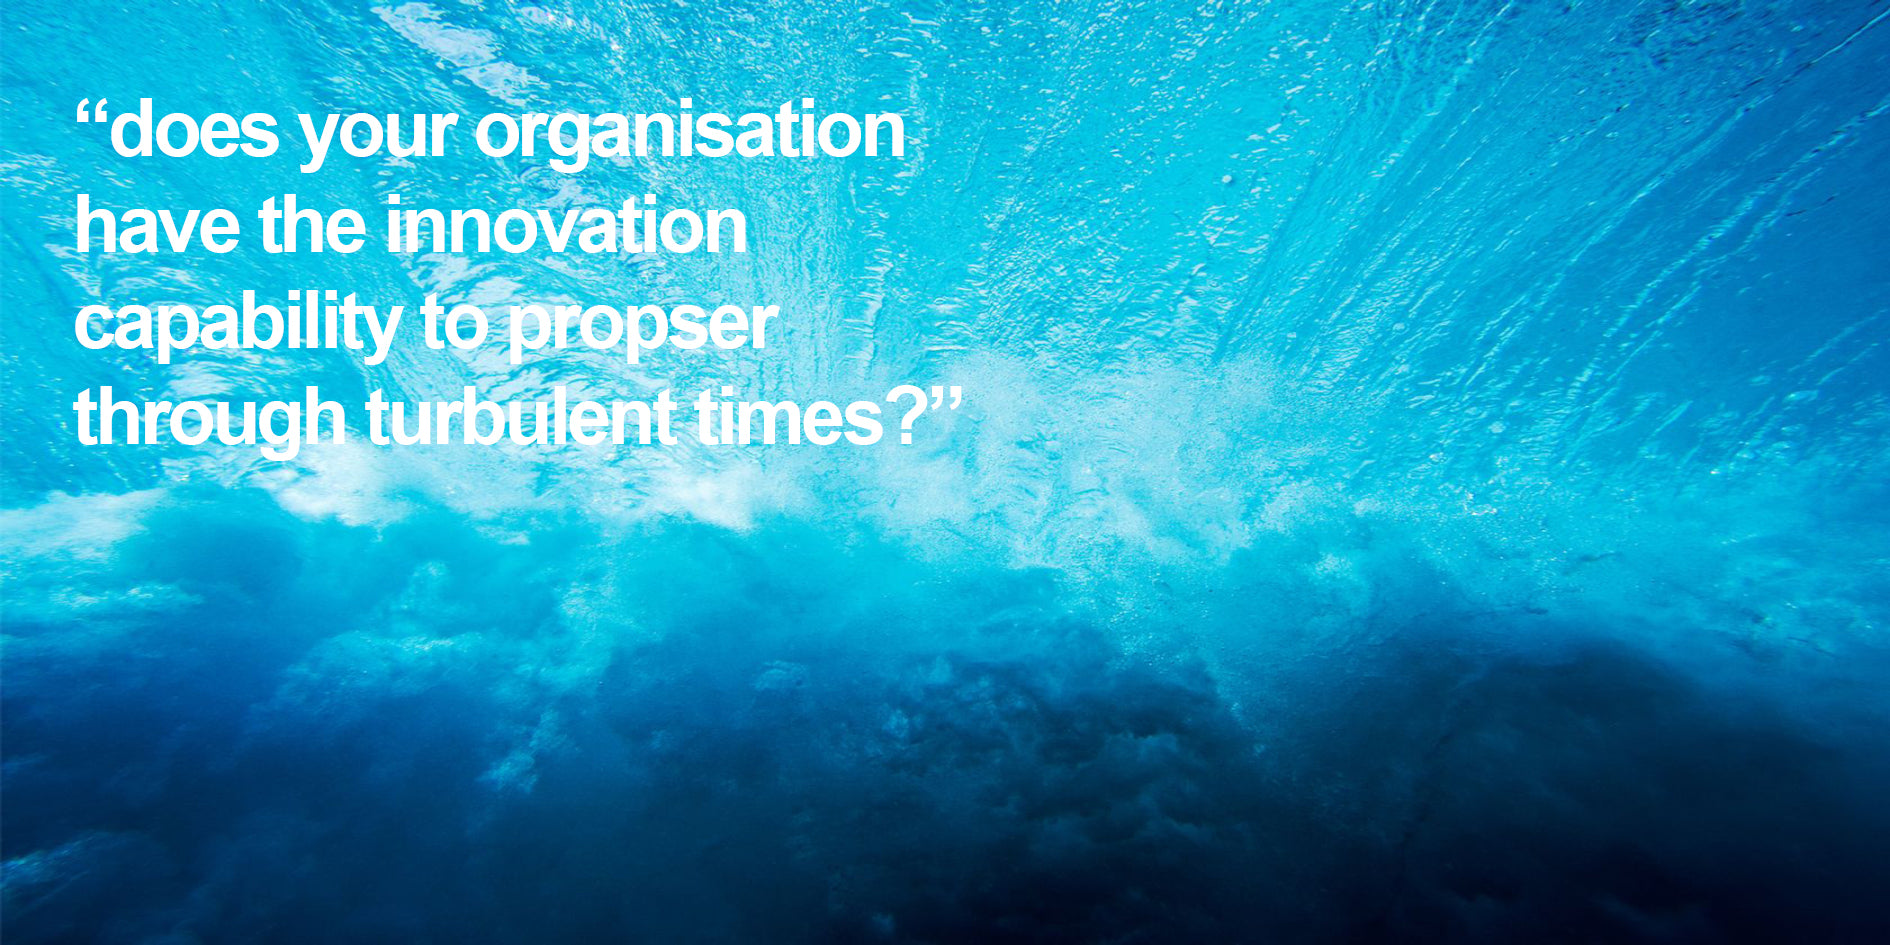 does your organisation have the innovation capability to prospser through turbulent times